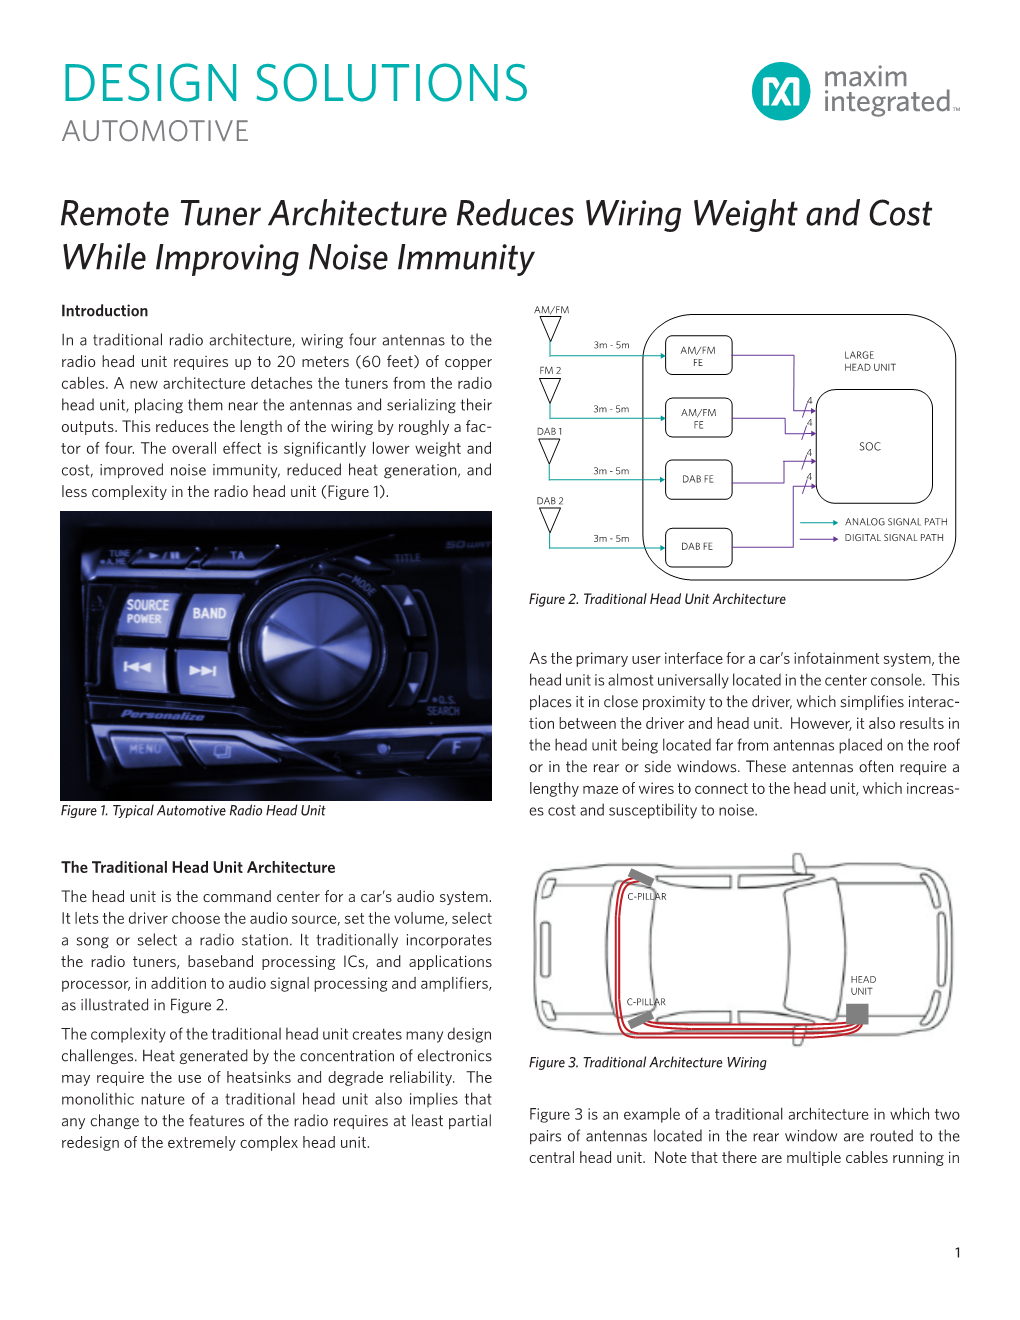 Remote Tuner Architecture Reduces Wiring Weight and Cost While Improving Noise Immunity